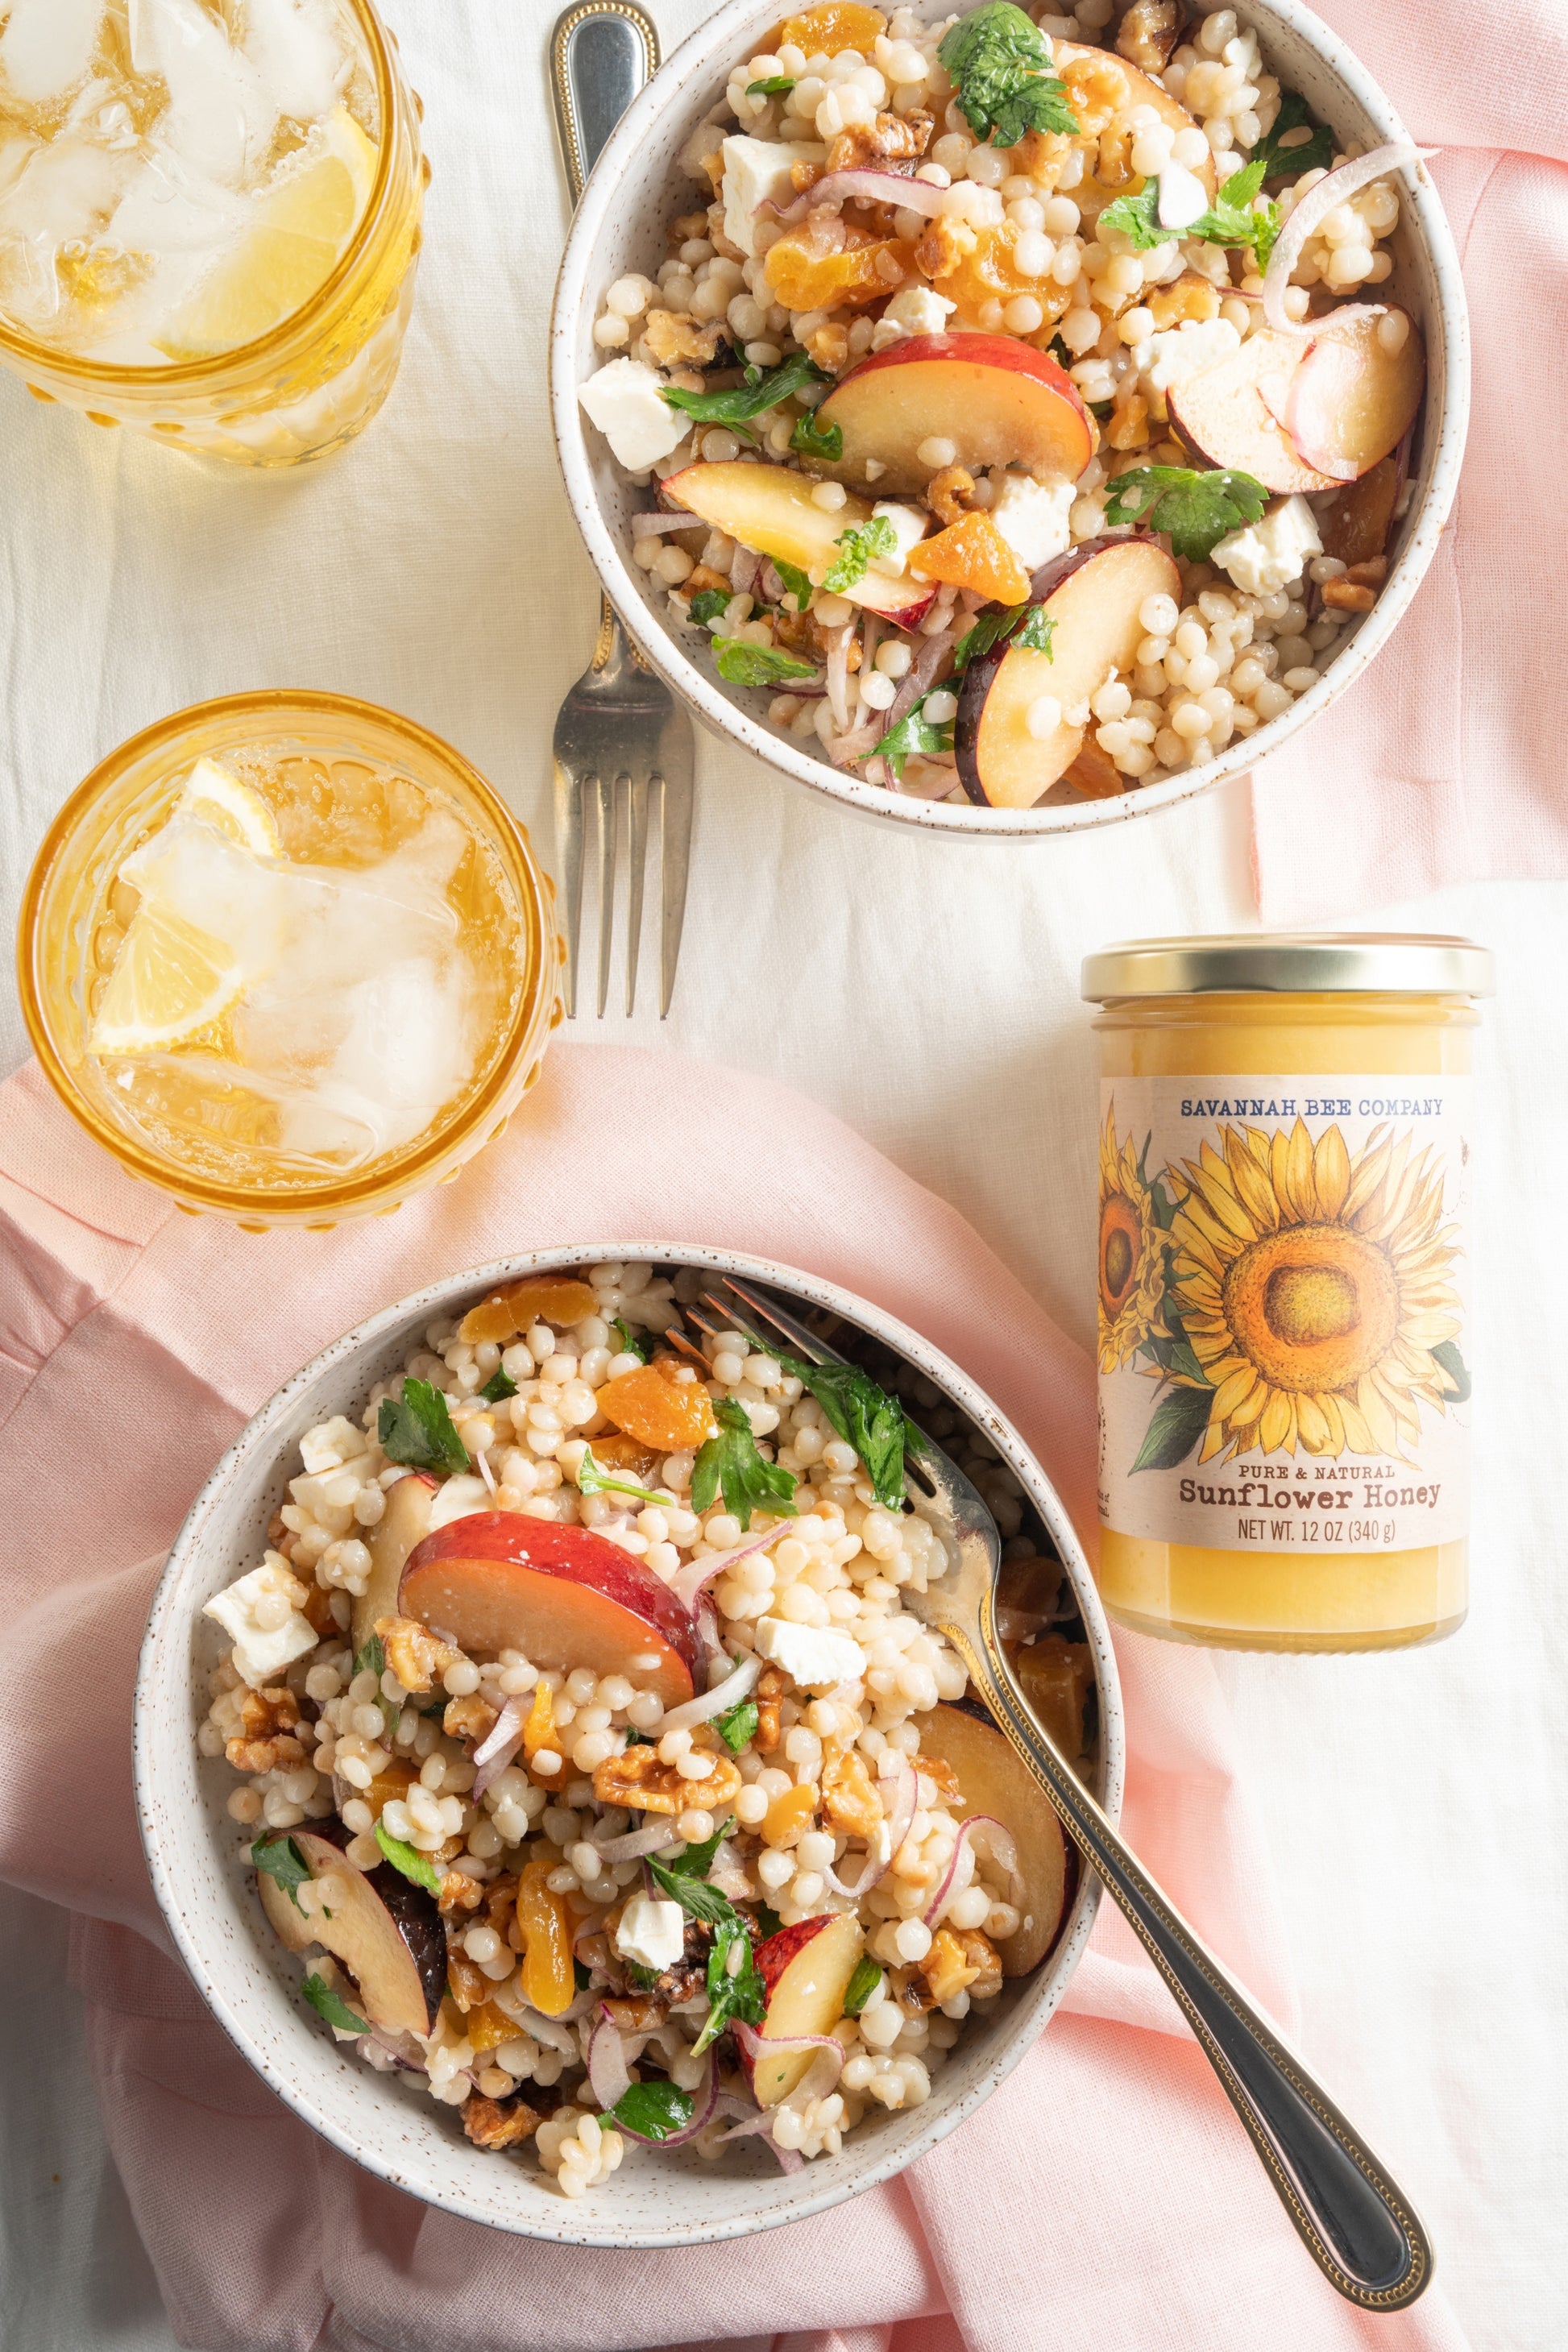 Two bowls of lemon herb cous cous salad made with sunflower honey dressing next to a 12 ounce jar of sunflower honey.